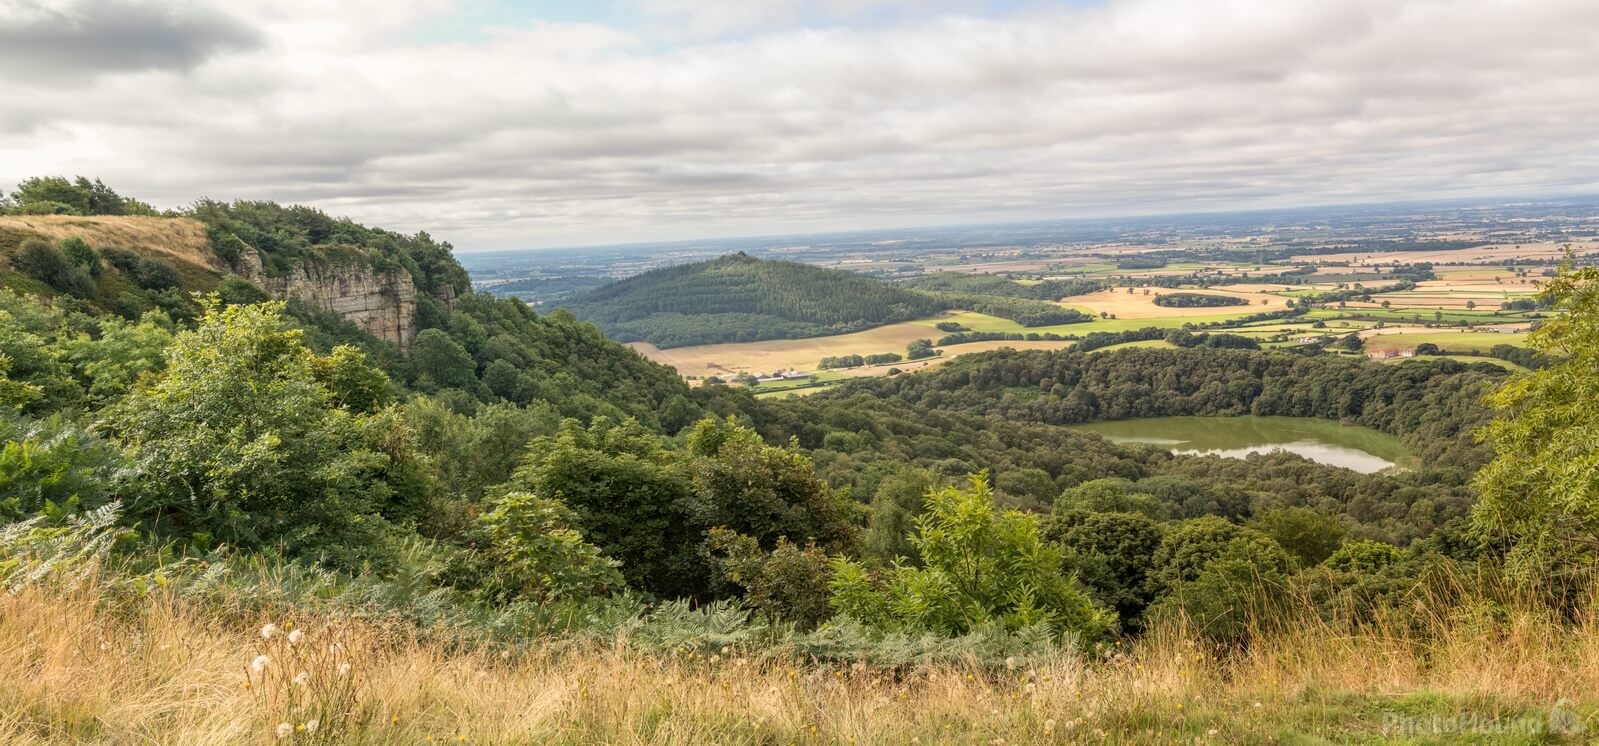 Image of Sutton Bank by Andy Killingbeck